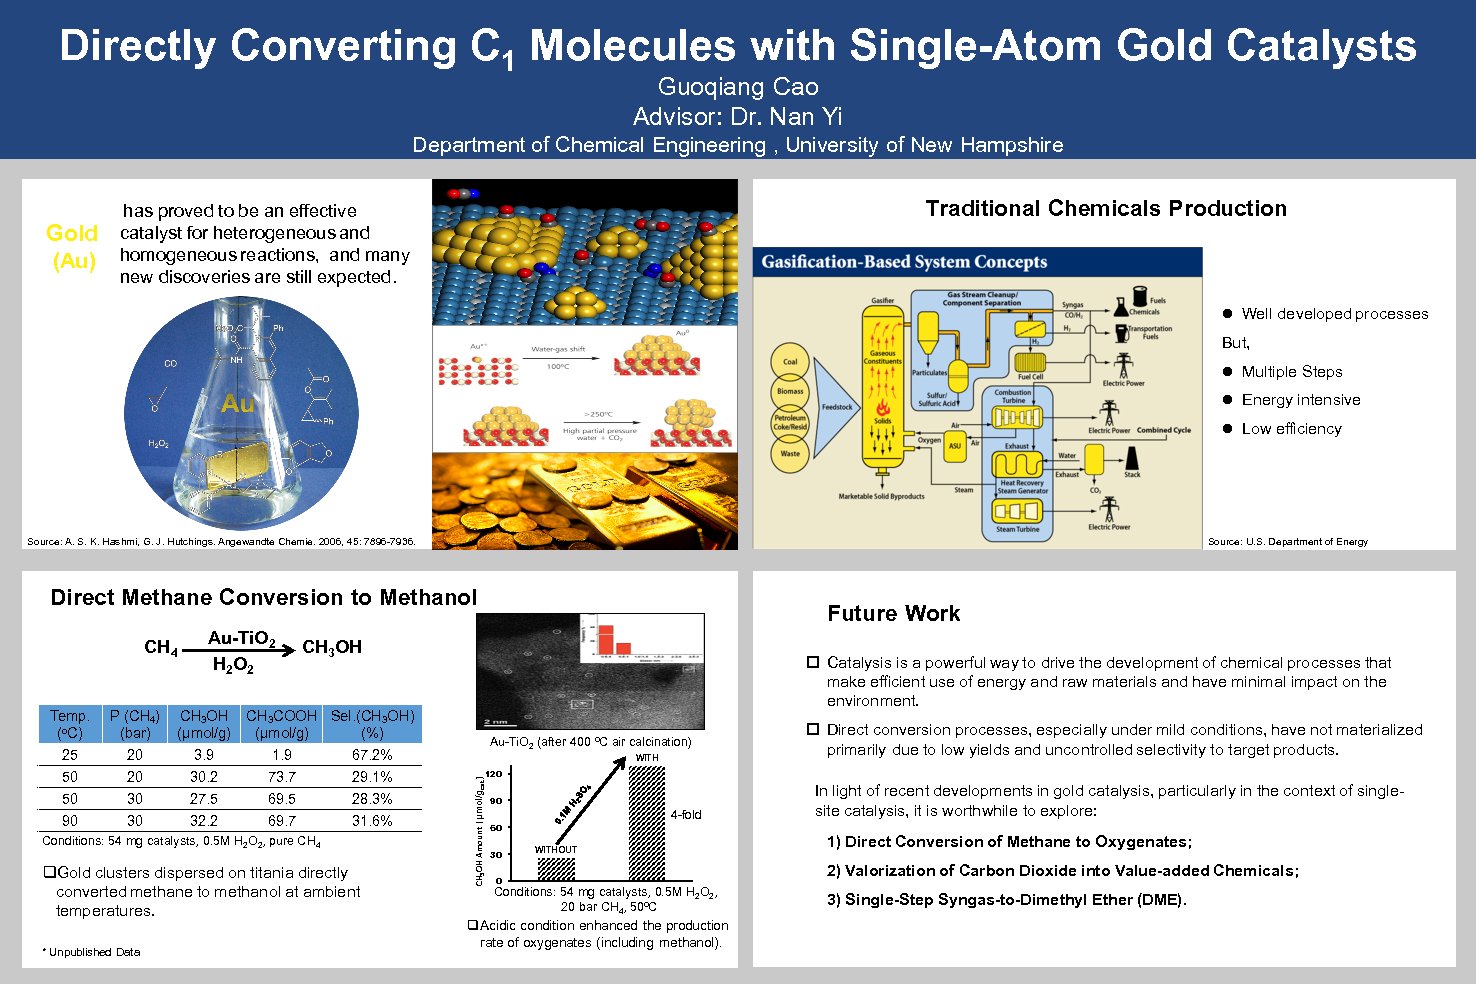 Directly Converting C1 Molecules With Single-Atom Gold Catalysts by cgqflyhigher